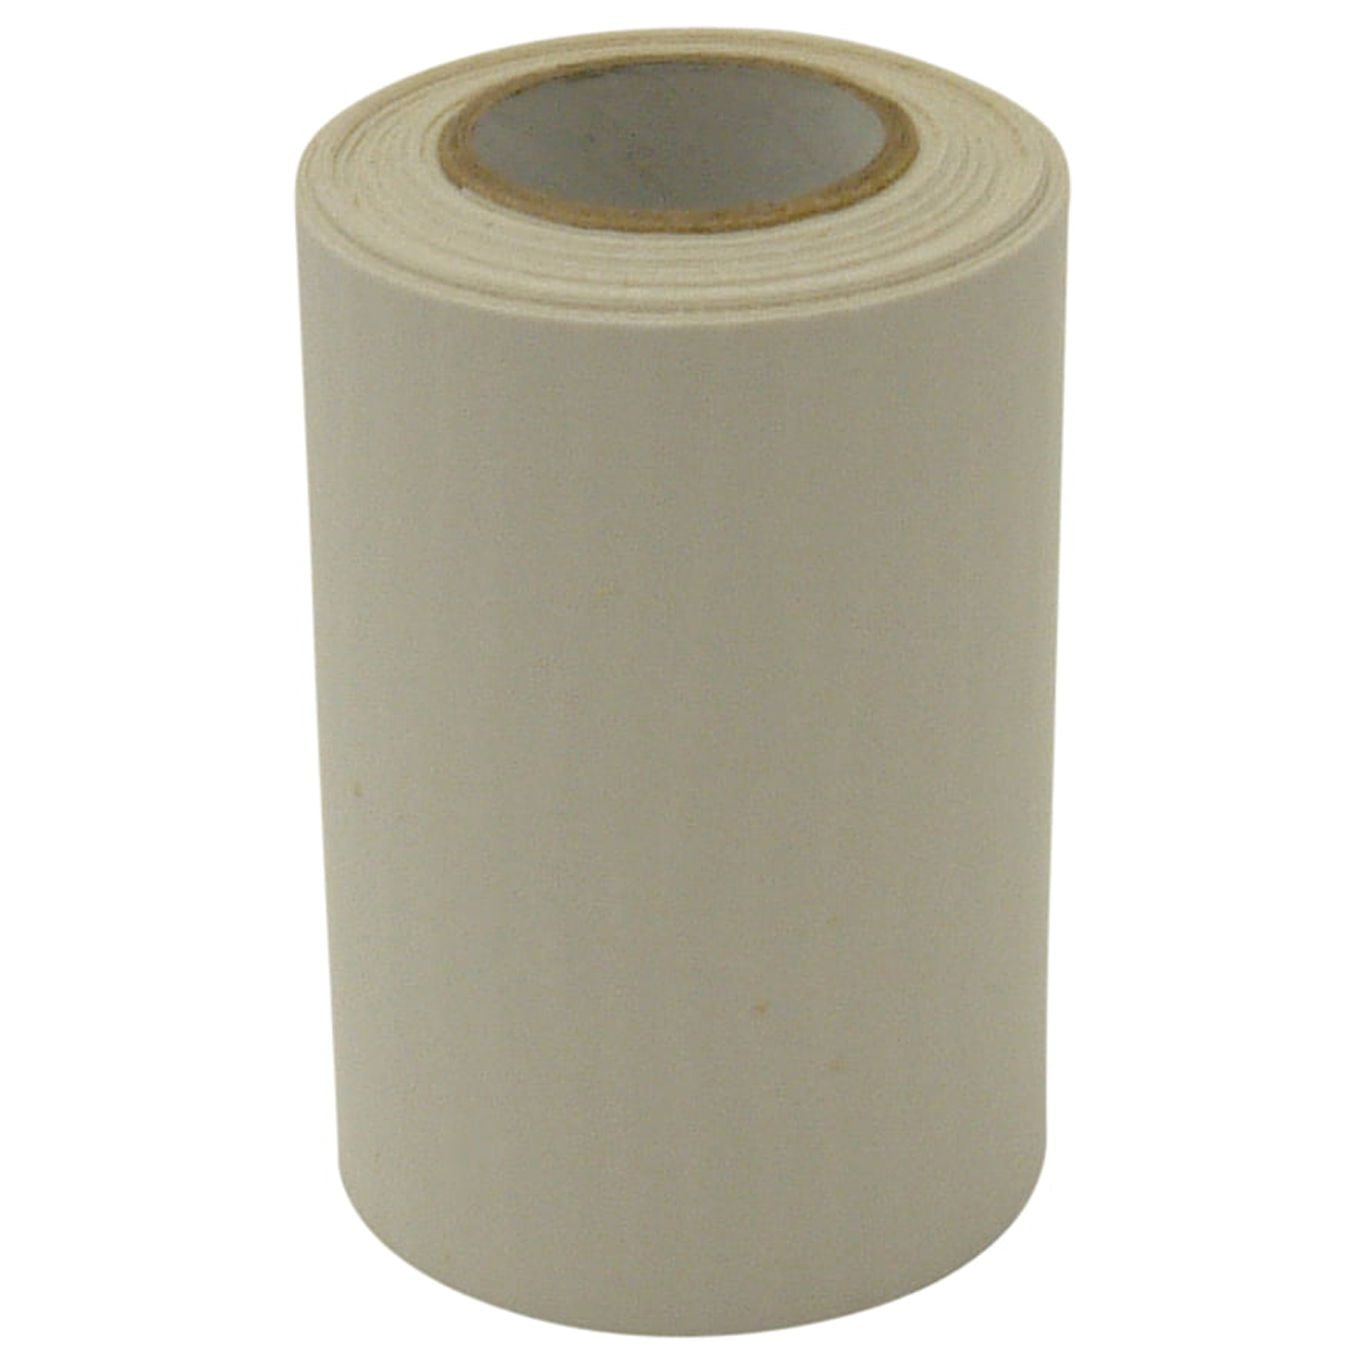 Gaffer Power Bookbinding Tape, White Cloth Book Repair Tape Safe Cloth Library Book Hinging Repair Tape, Made in The USA, Acid Free and Archival Safe